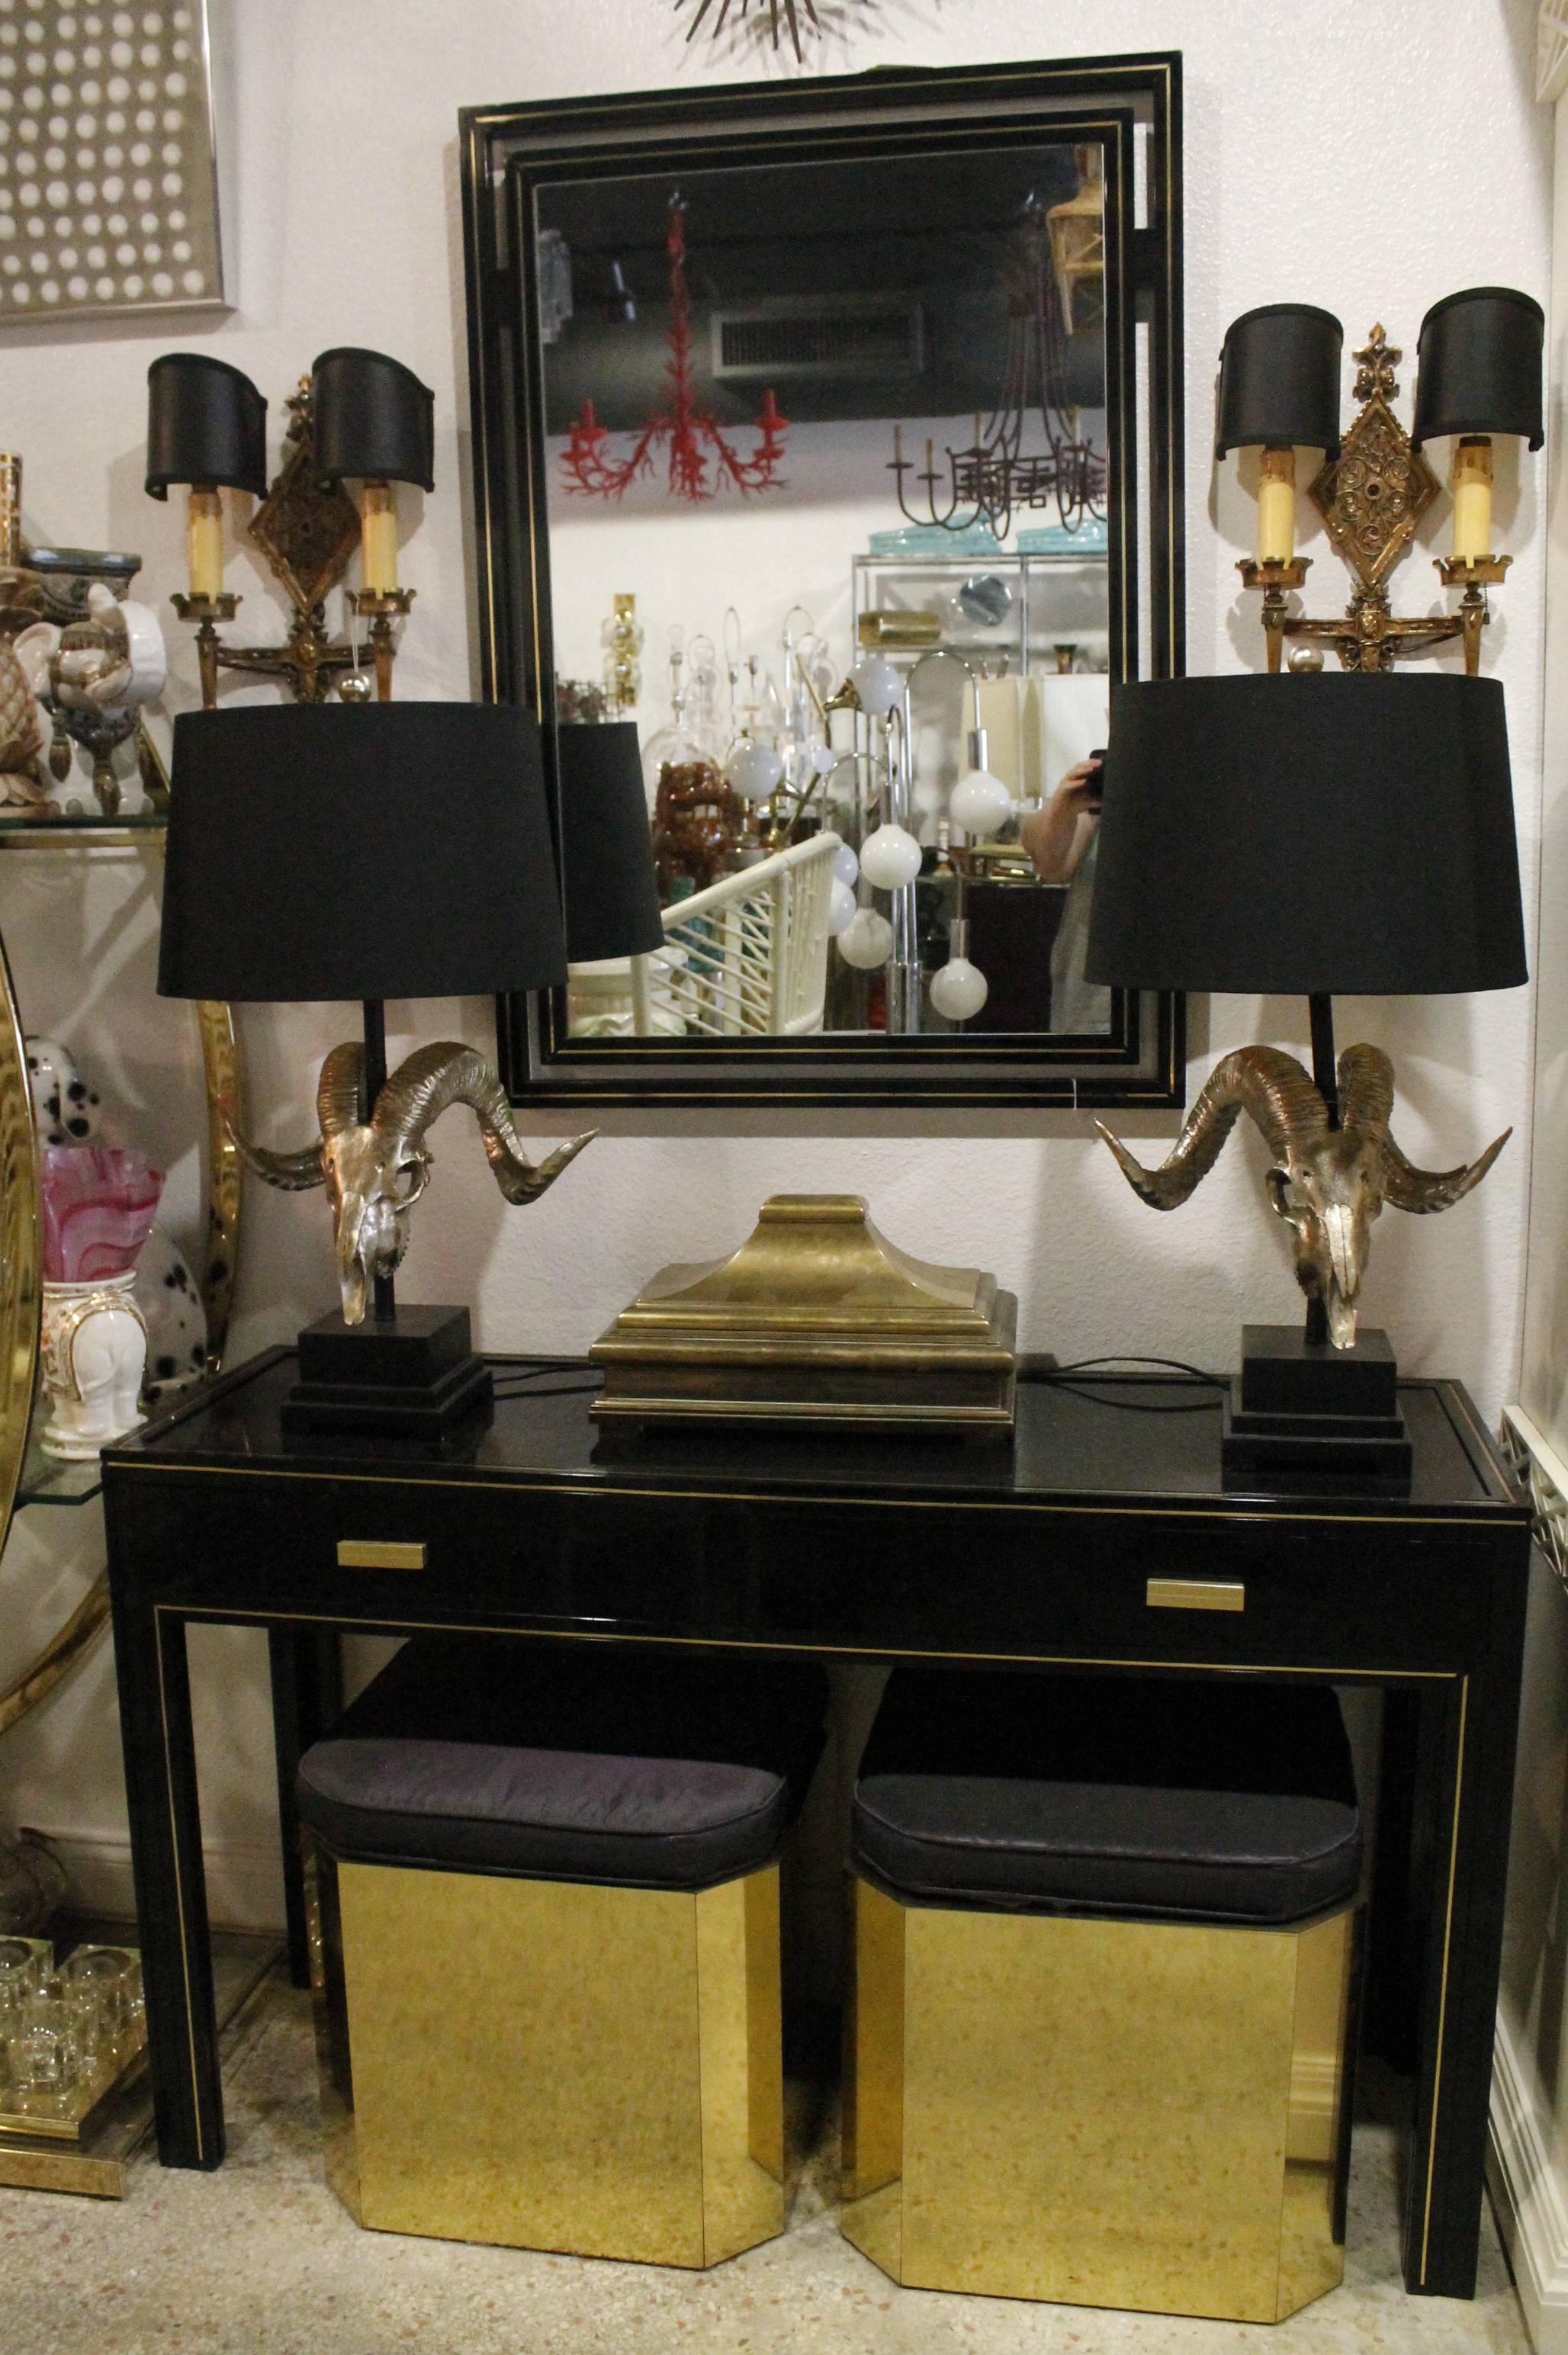 Amazingly beautiful two-piece set by Pierre Vandel Paris (marked). Includes console desk table with drawer and matching wall mirror. Black lacquer, black glass, brass accents. Other pieces pictured other than the console and mirror are sold